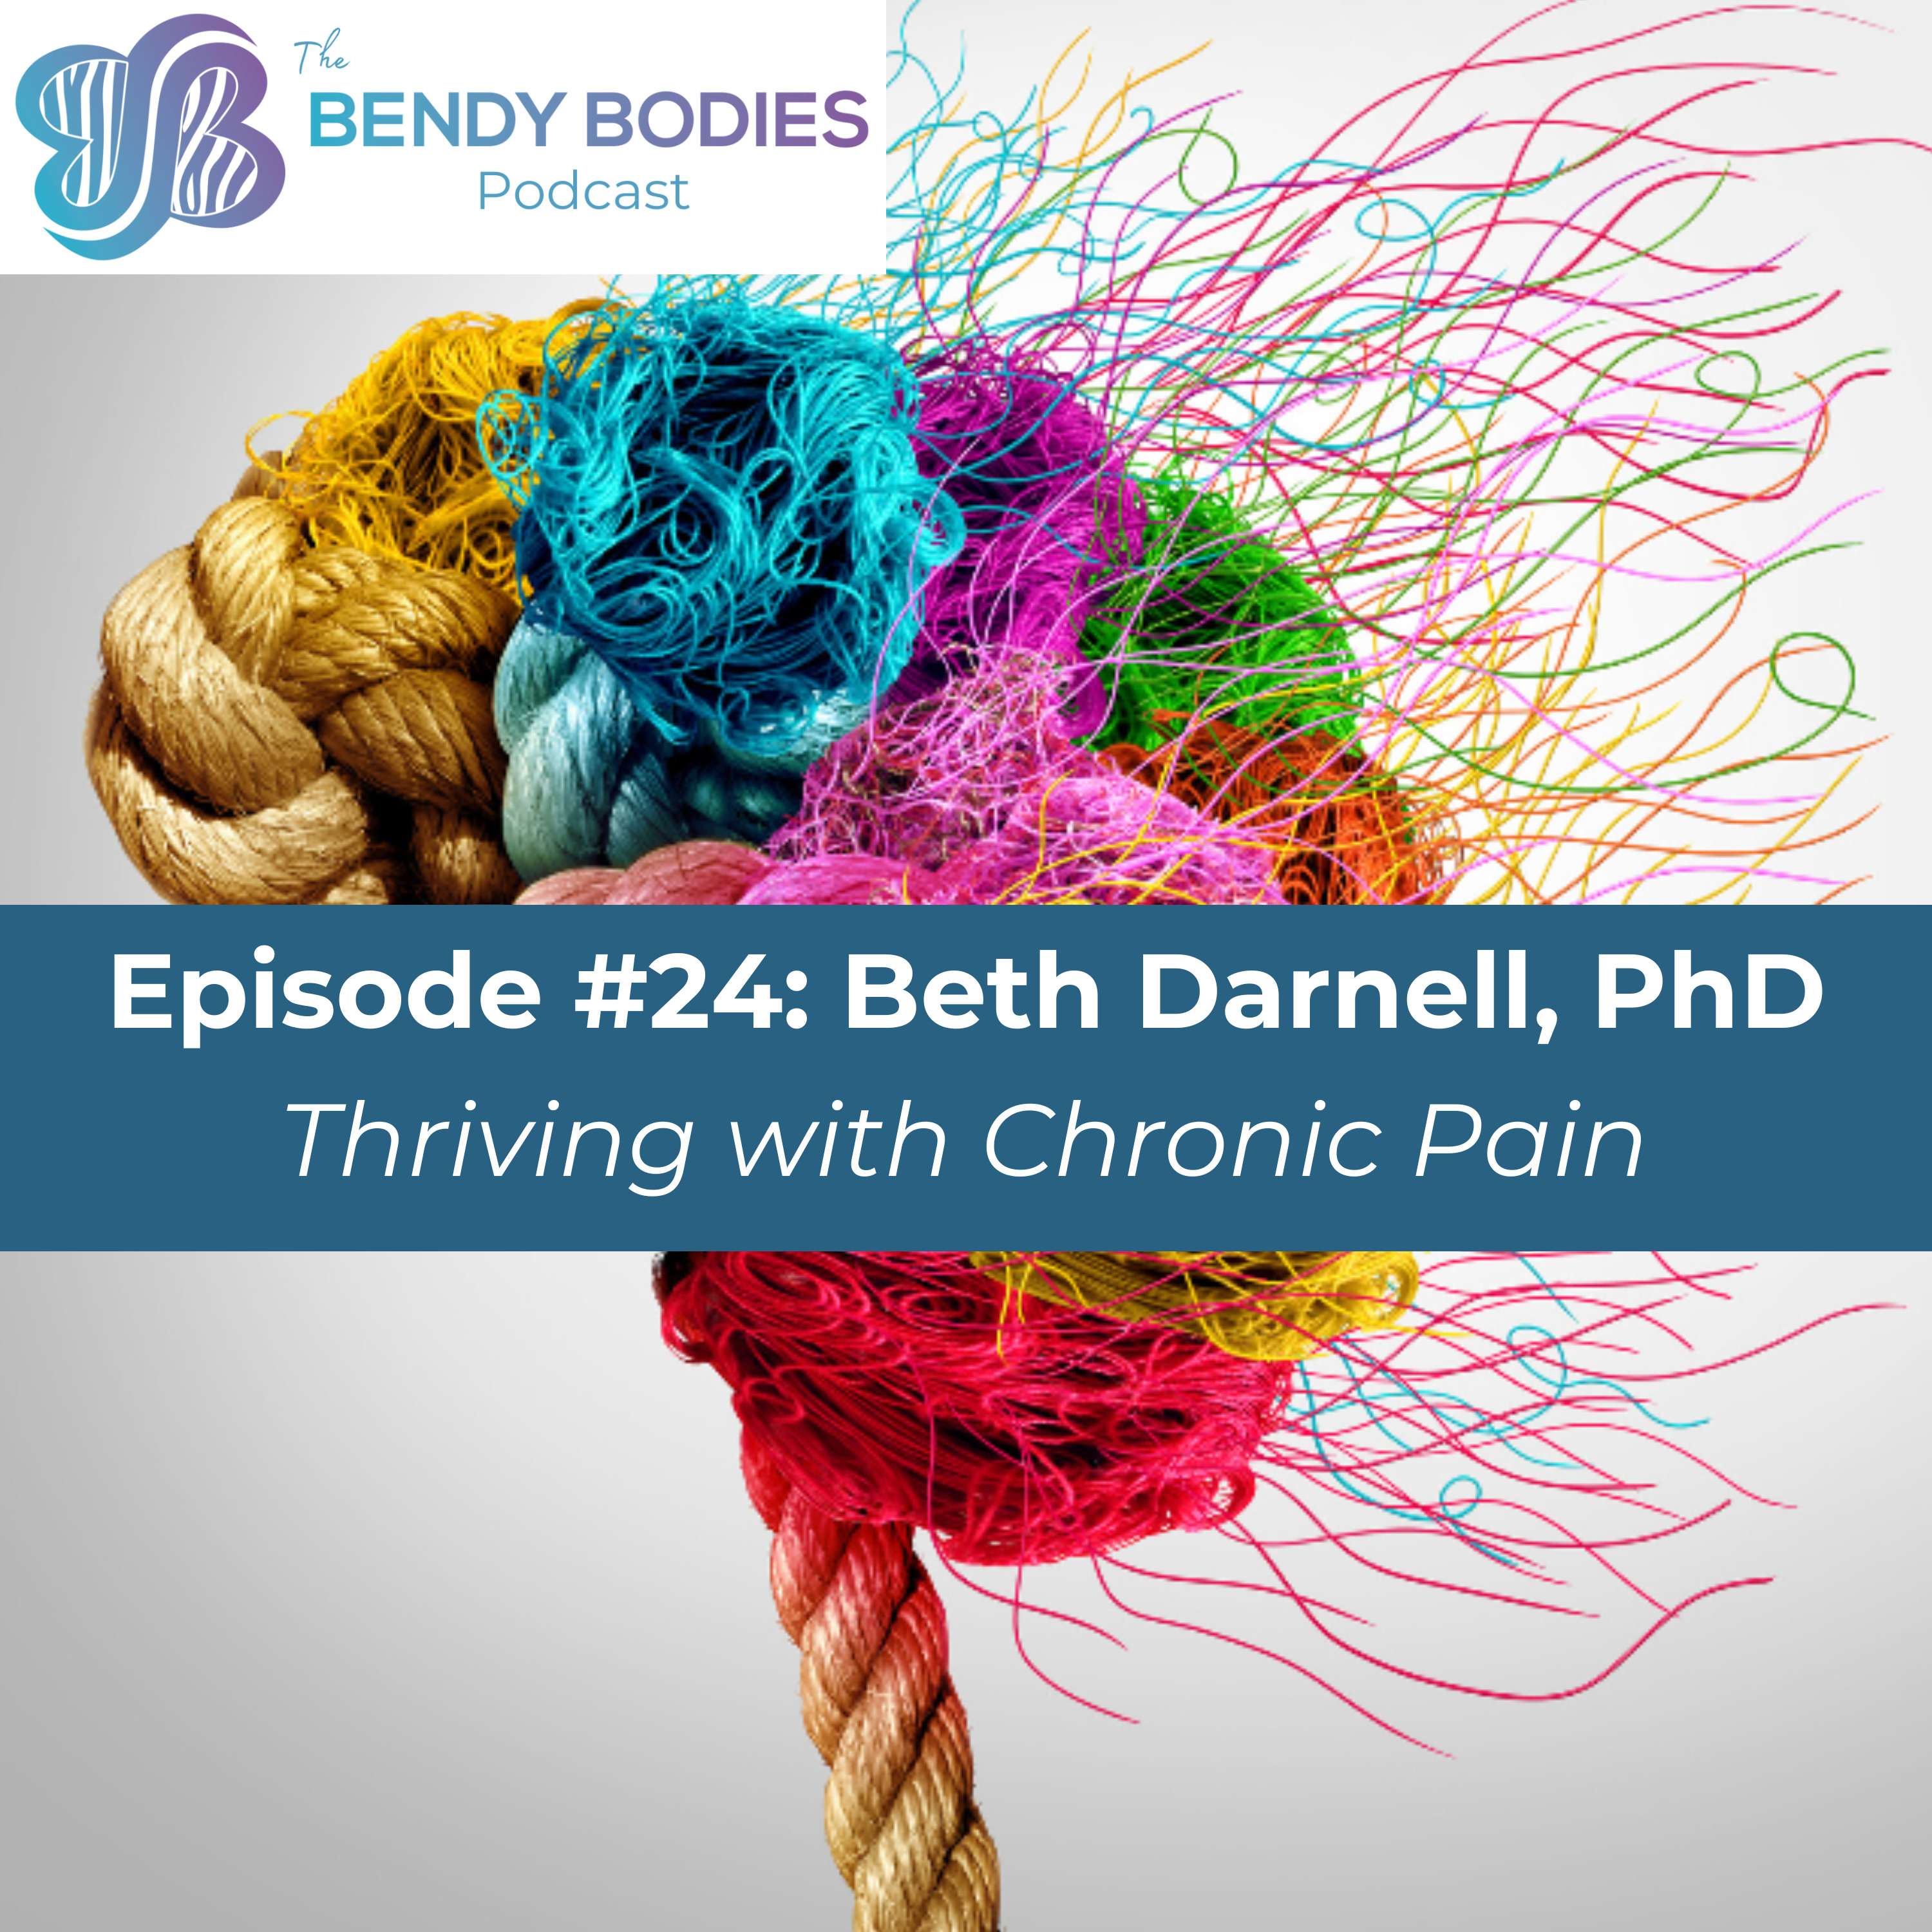 24. Thriving with Chronic Pain with Beth Darnall, PhD